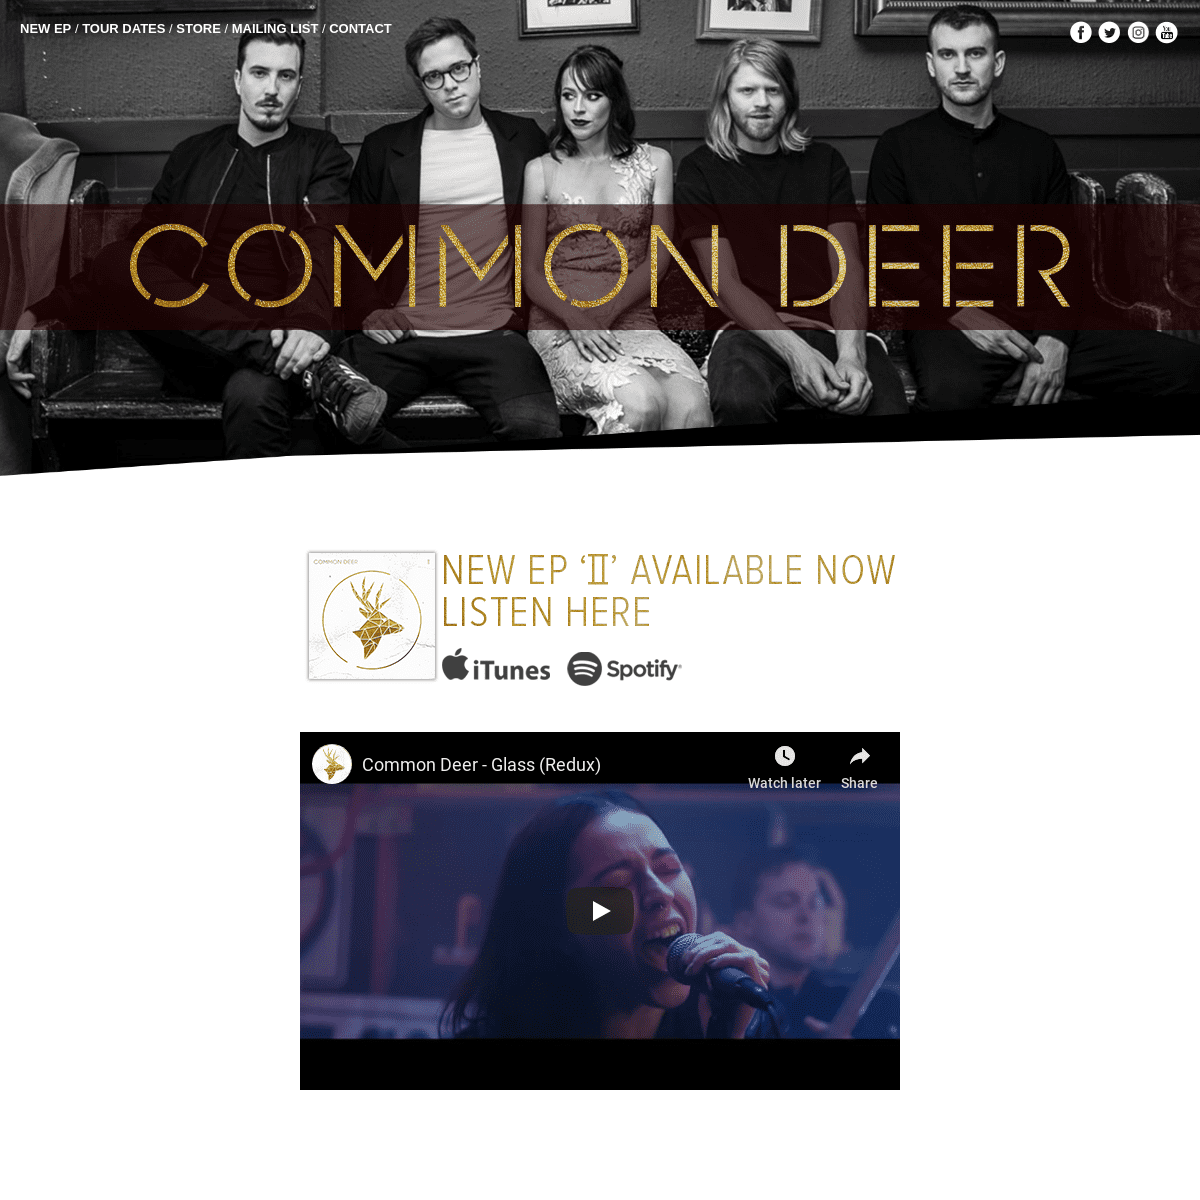 A complete backup of commondeermusic.com